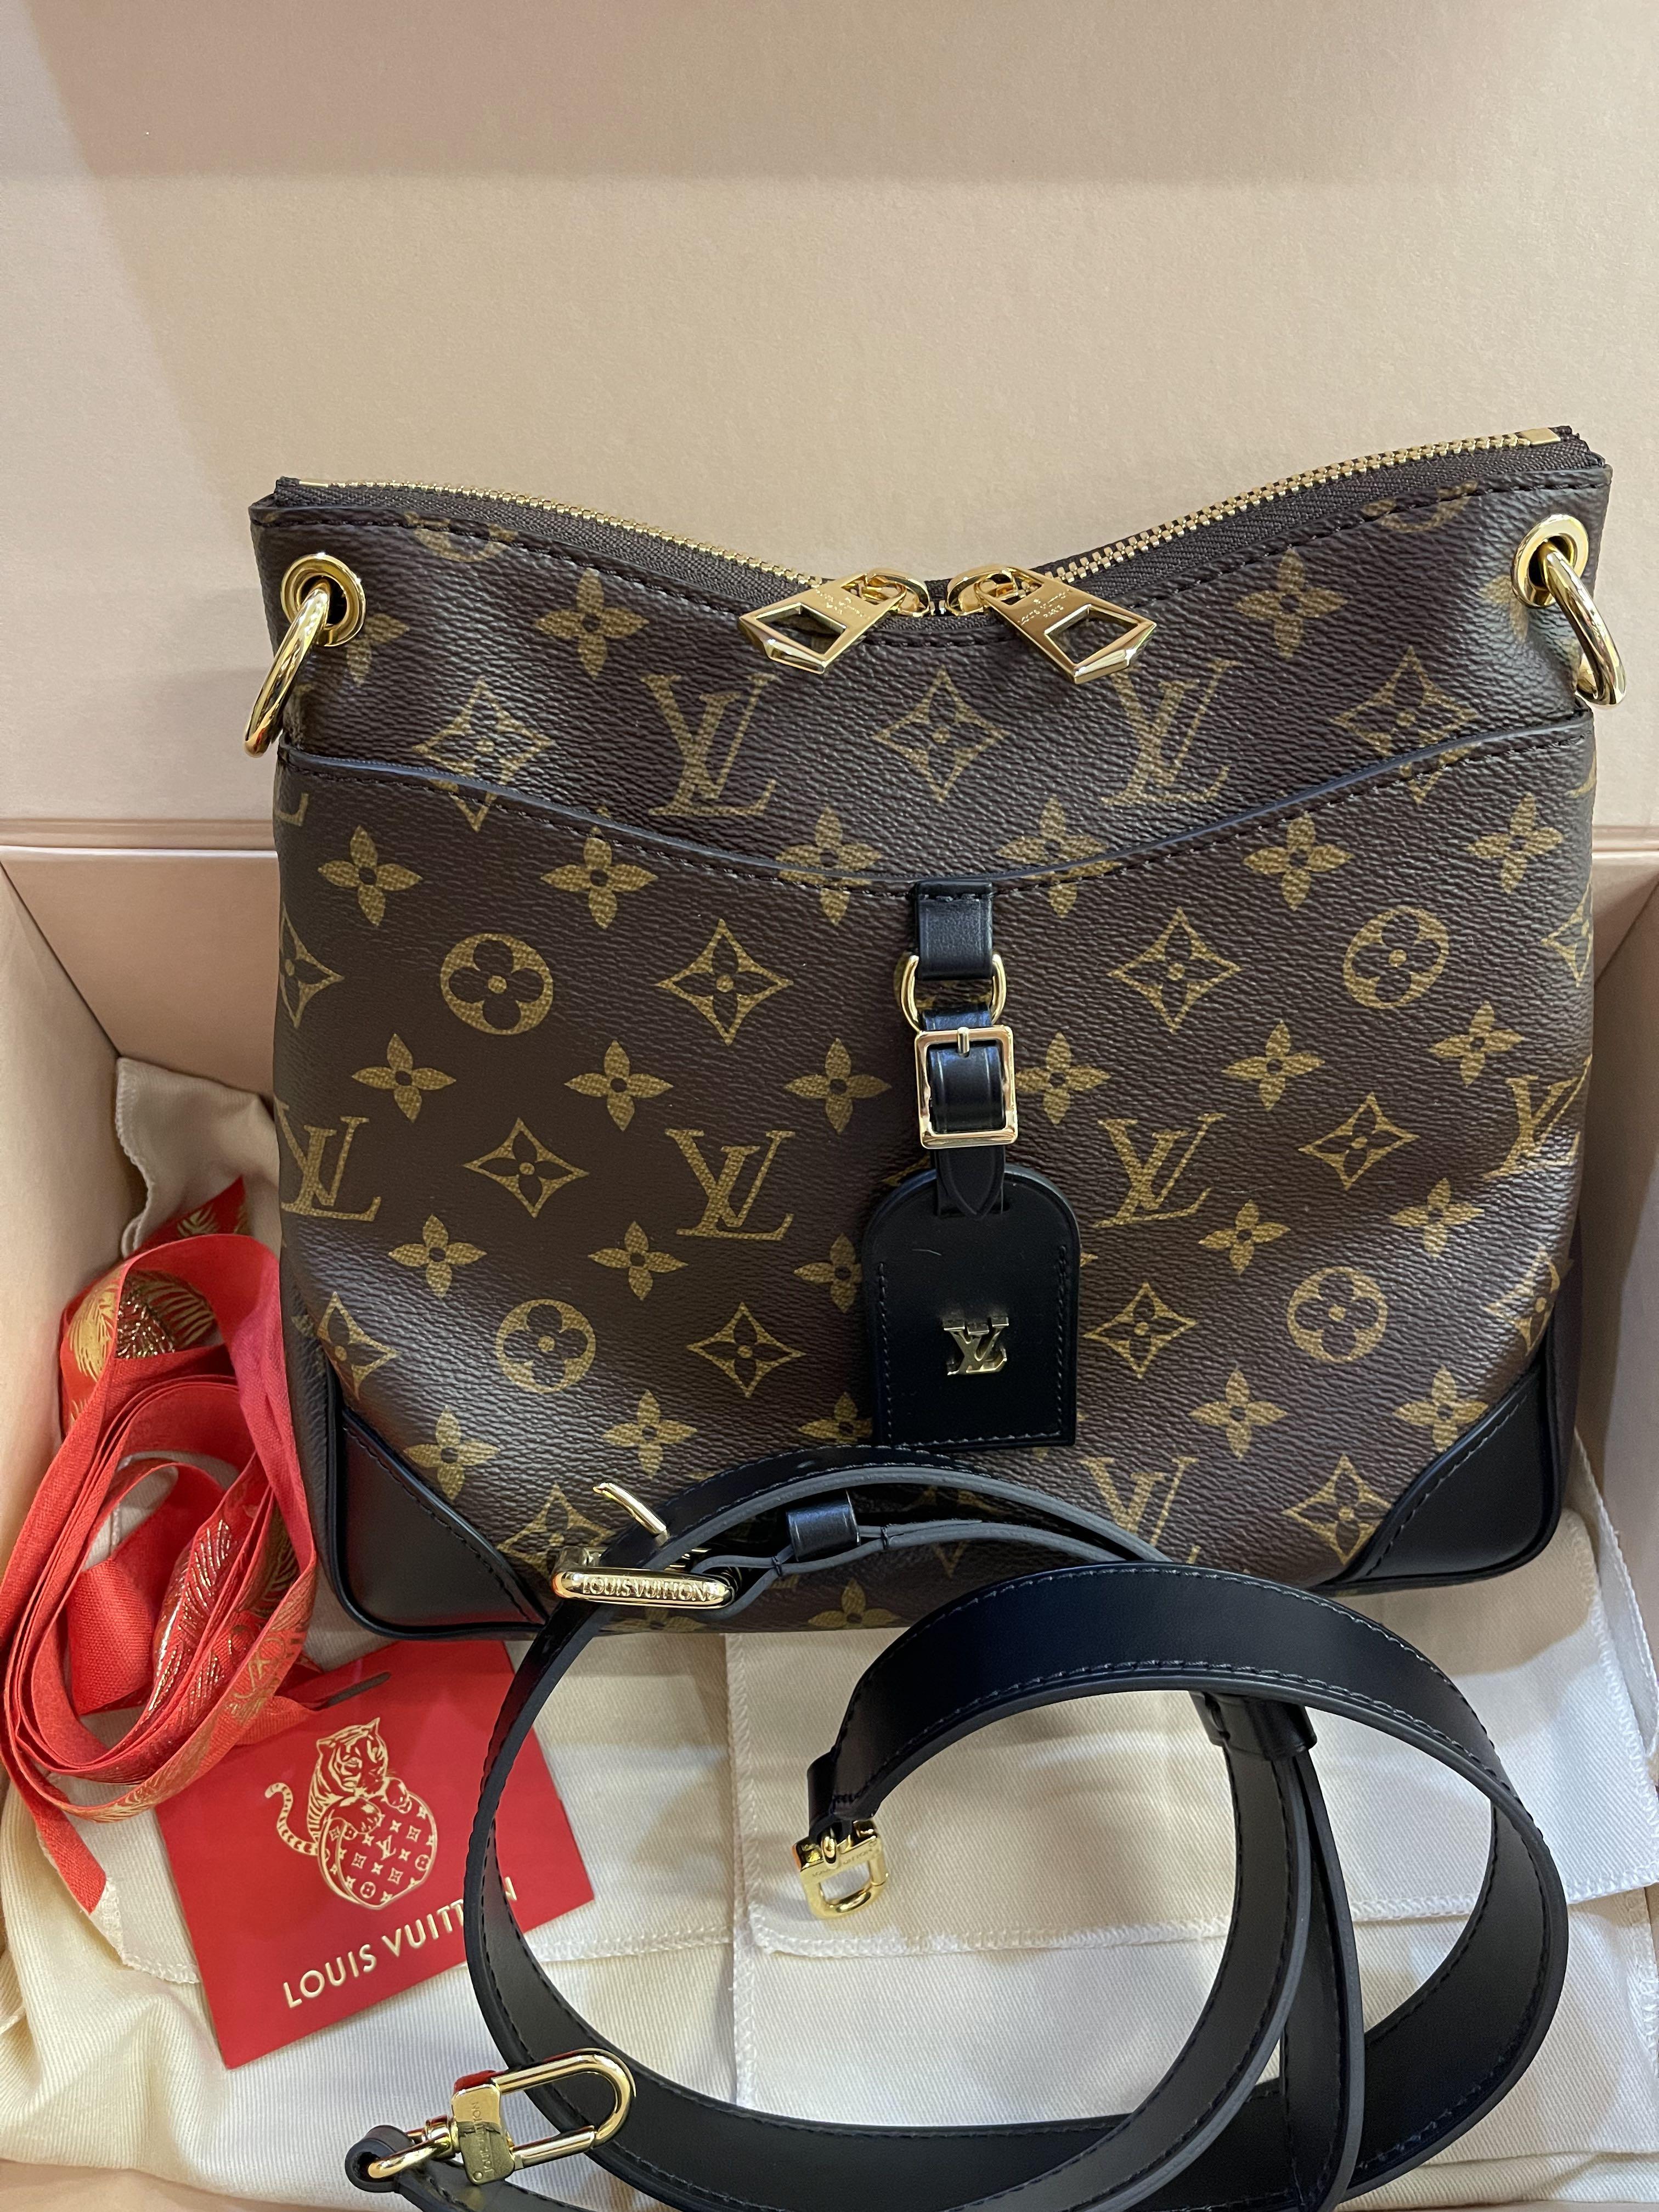 New LV Bag! Louis Vuitton Odeon PM Vs MM ** Watch Before You Buy